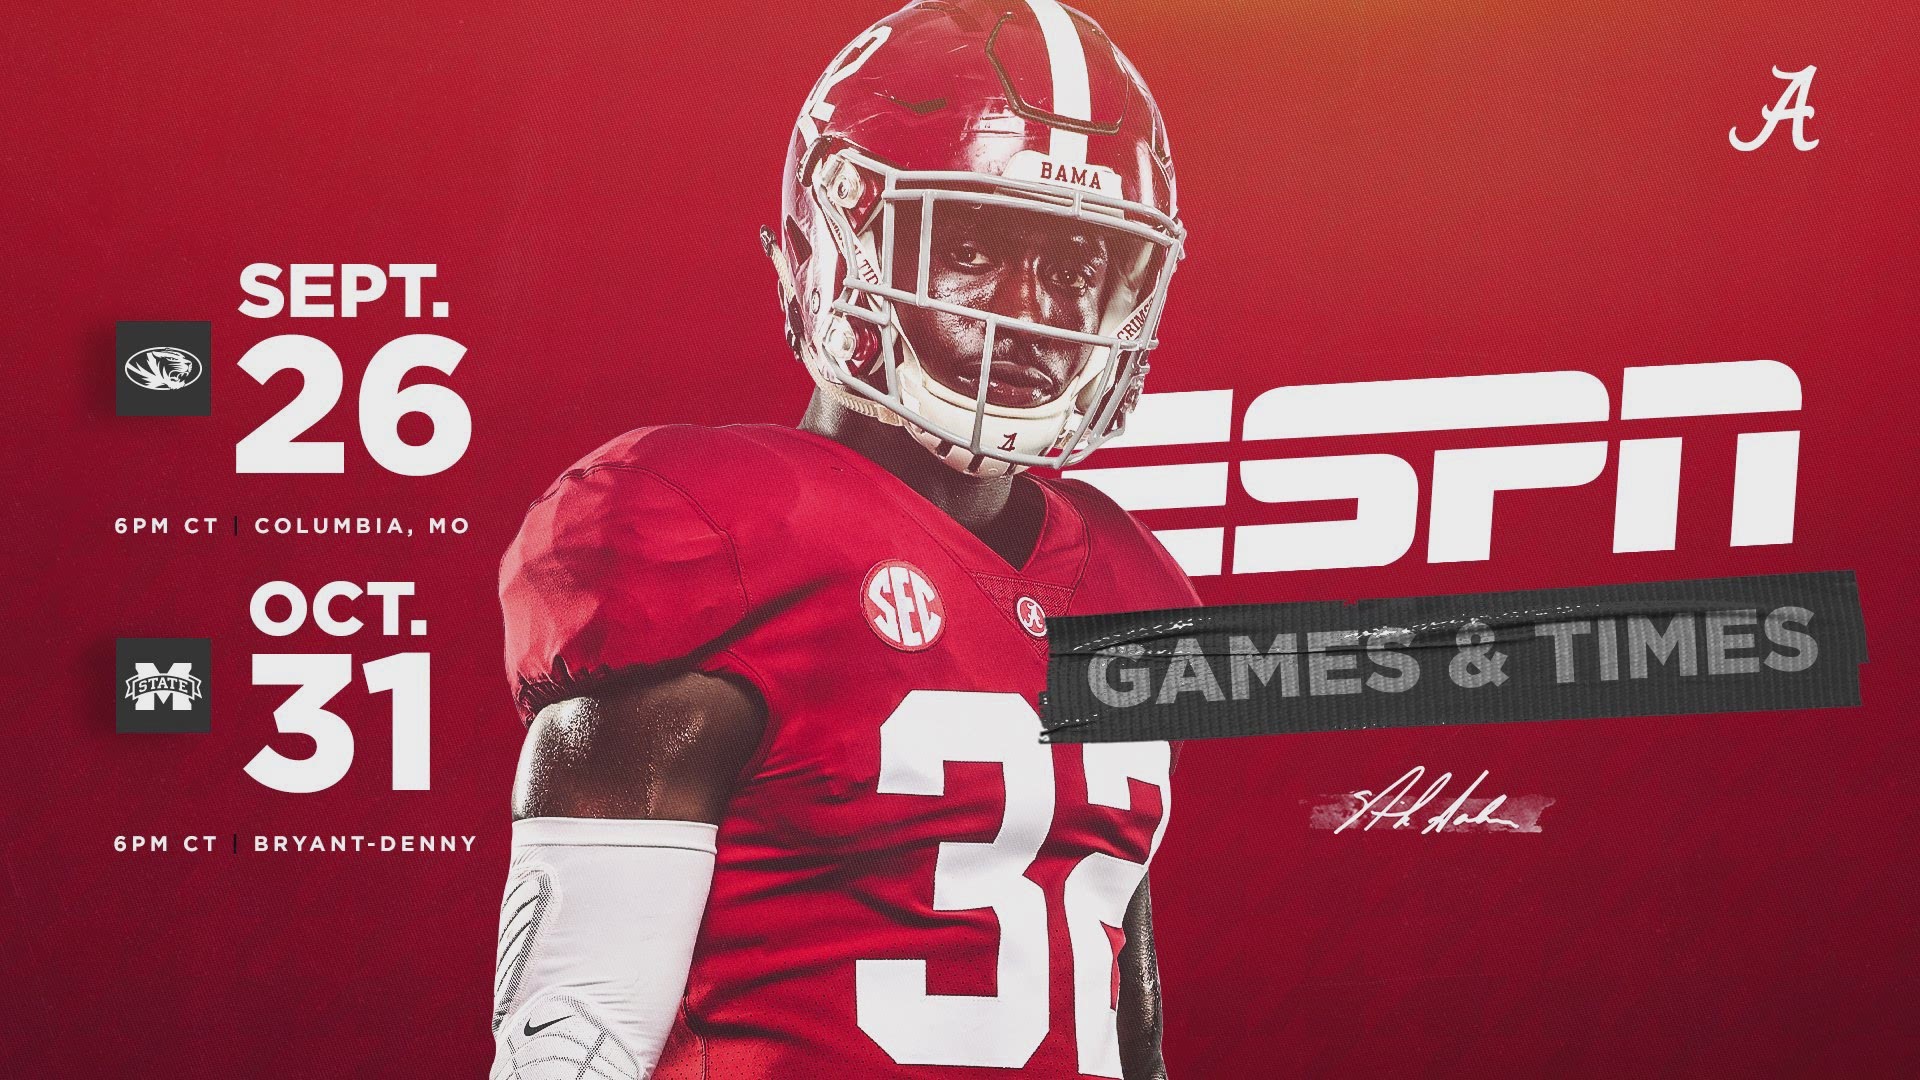 The Crimson Tide will play on CBS three times with two other contests confirmed on the ESPN family of networks